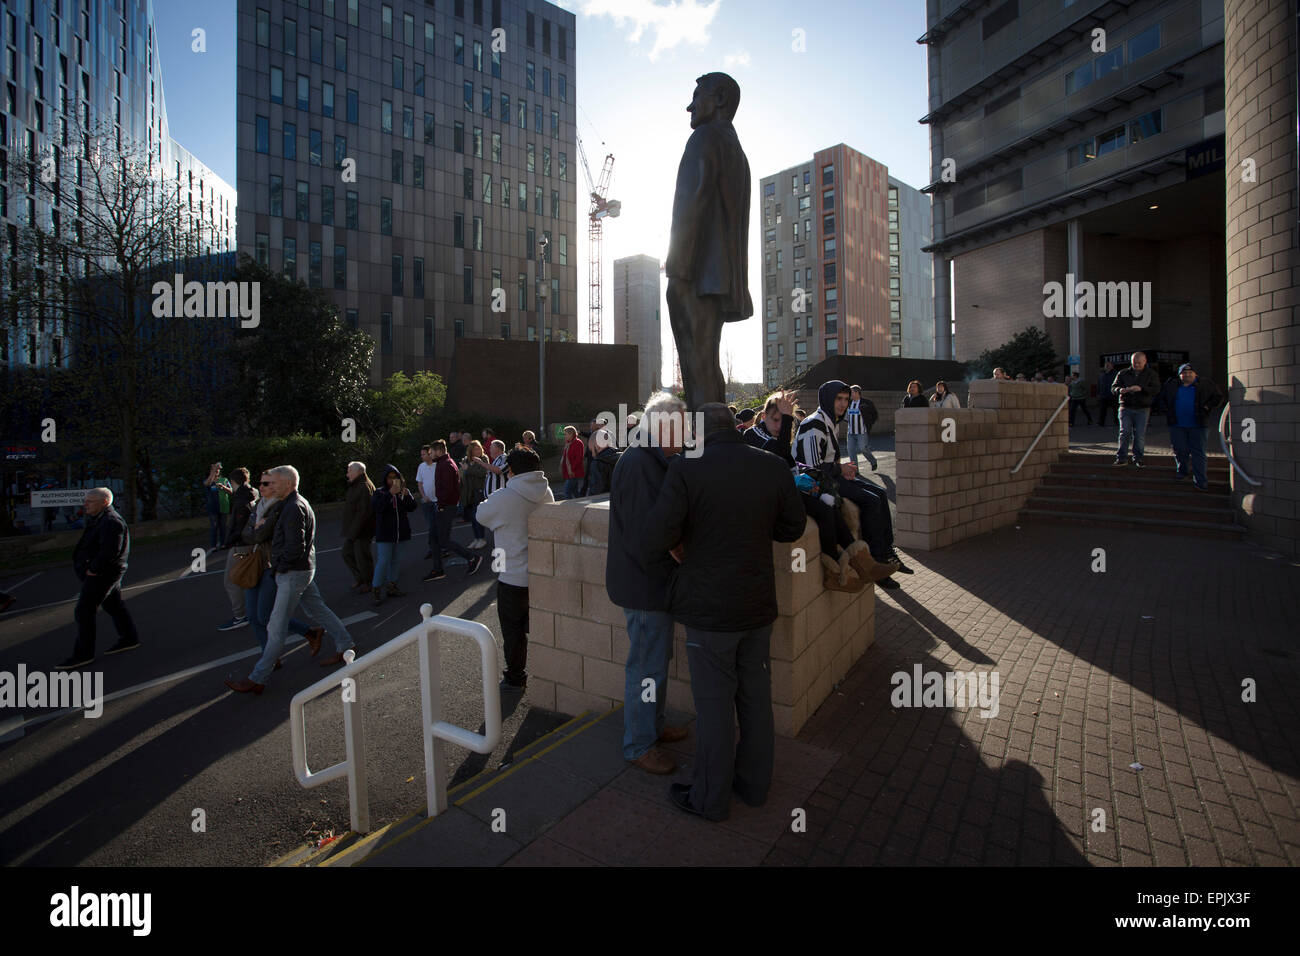 Supporters walking past the statue to former manager Sir Bobby Robson, situated outside the Milburn Stand of the stadium after Newcastle United host Tottenham Hotspurs in an English Premier League match at St. James' Park. The match was boycotted by a section of the home support critical of the role of owner Mike Ashley and sponsorship by a payday loan company. The match was won by Spurs by 3-1, watched by 47,427, the lowest league gate of the season at the stadium. Stock Photo